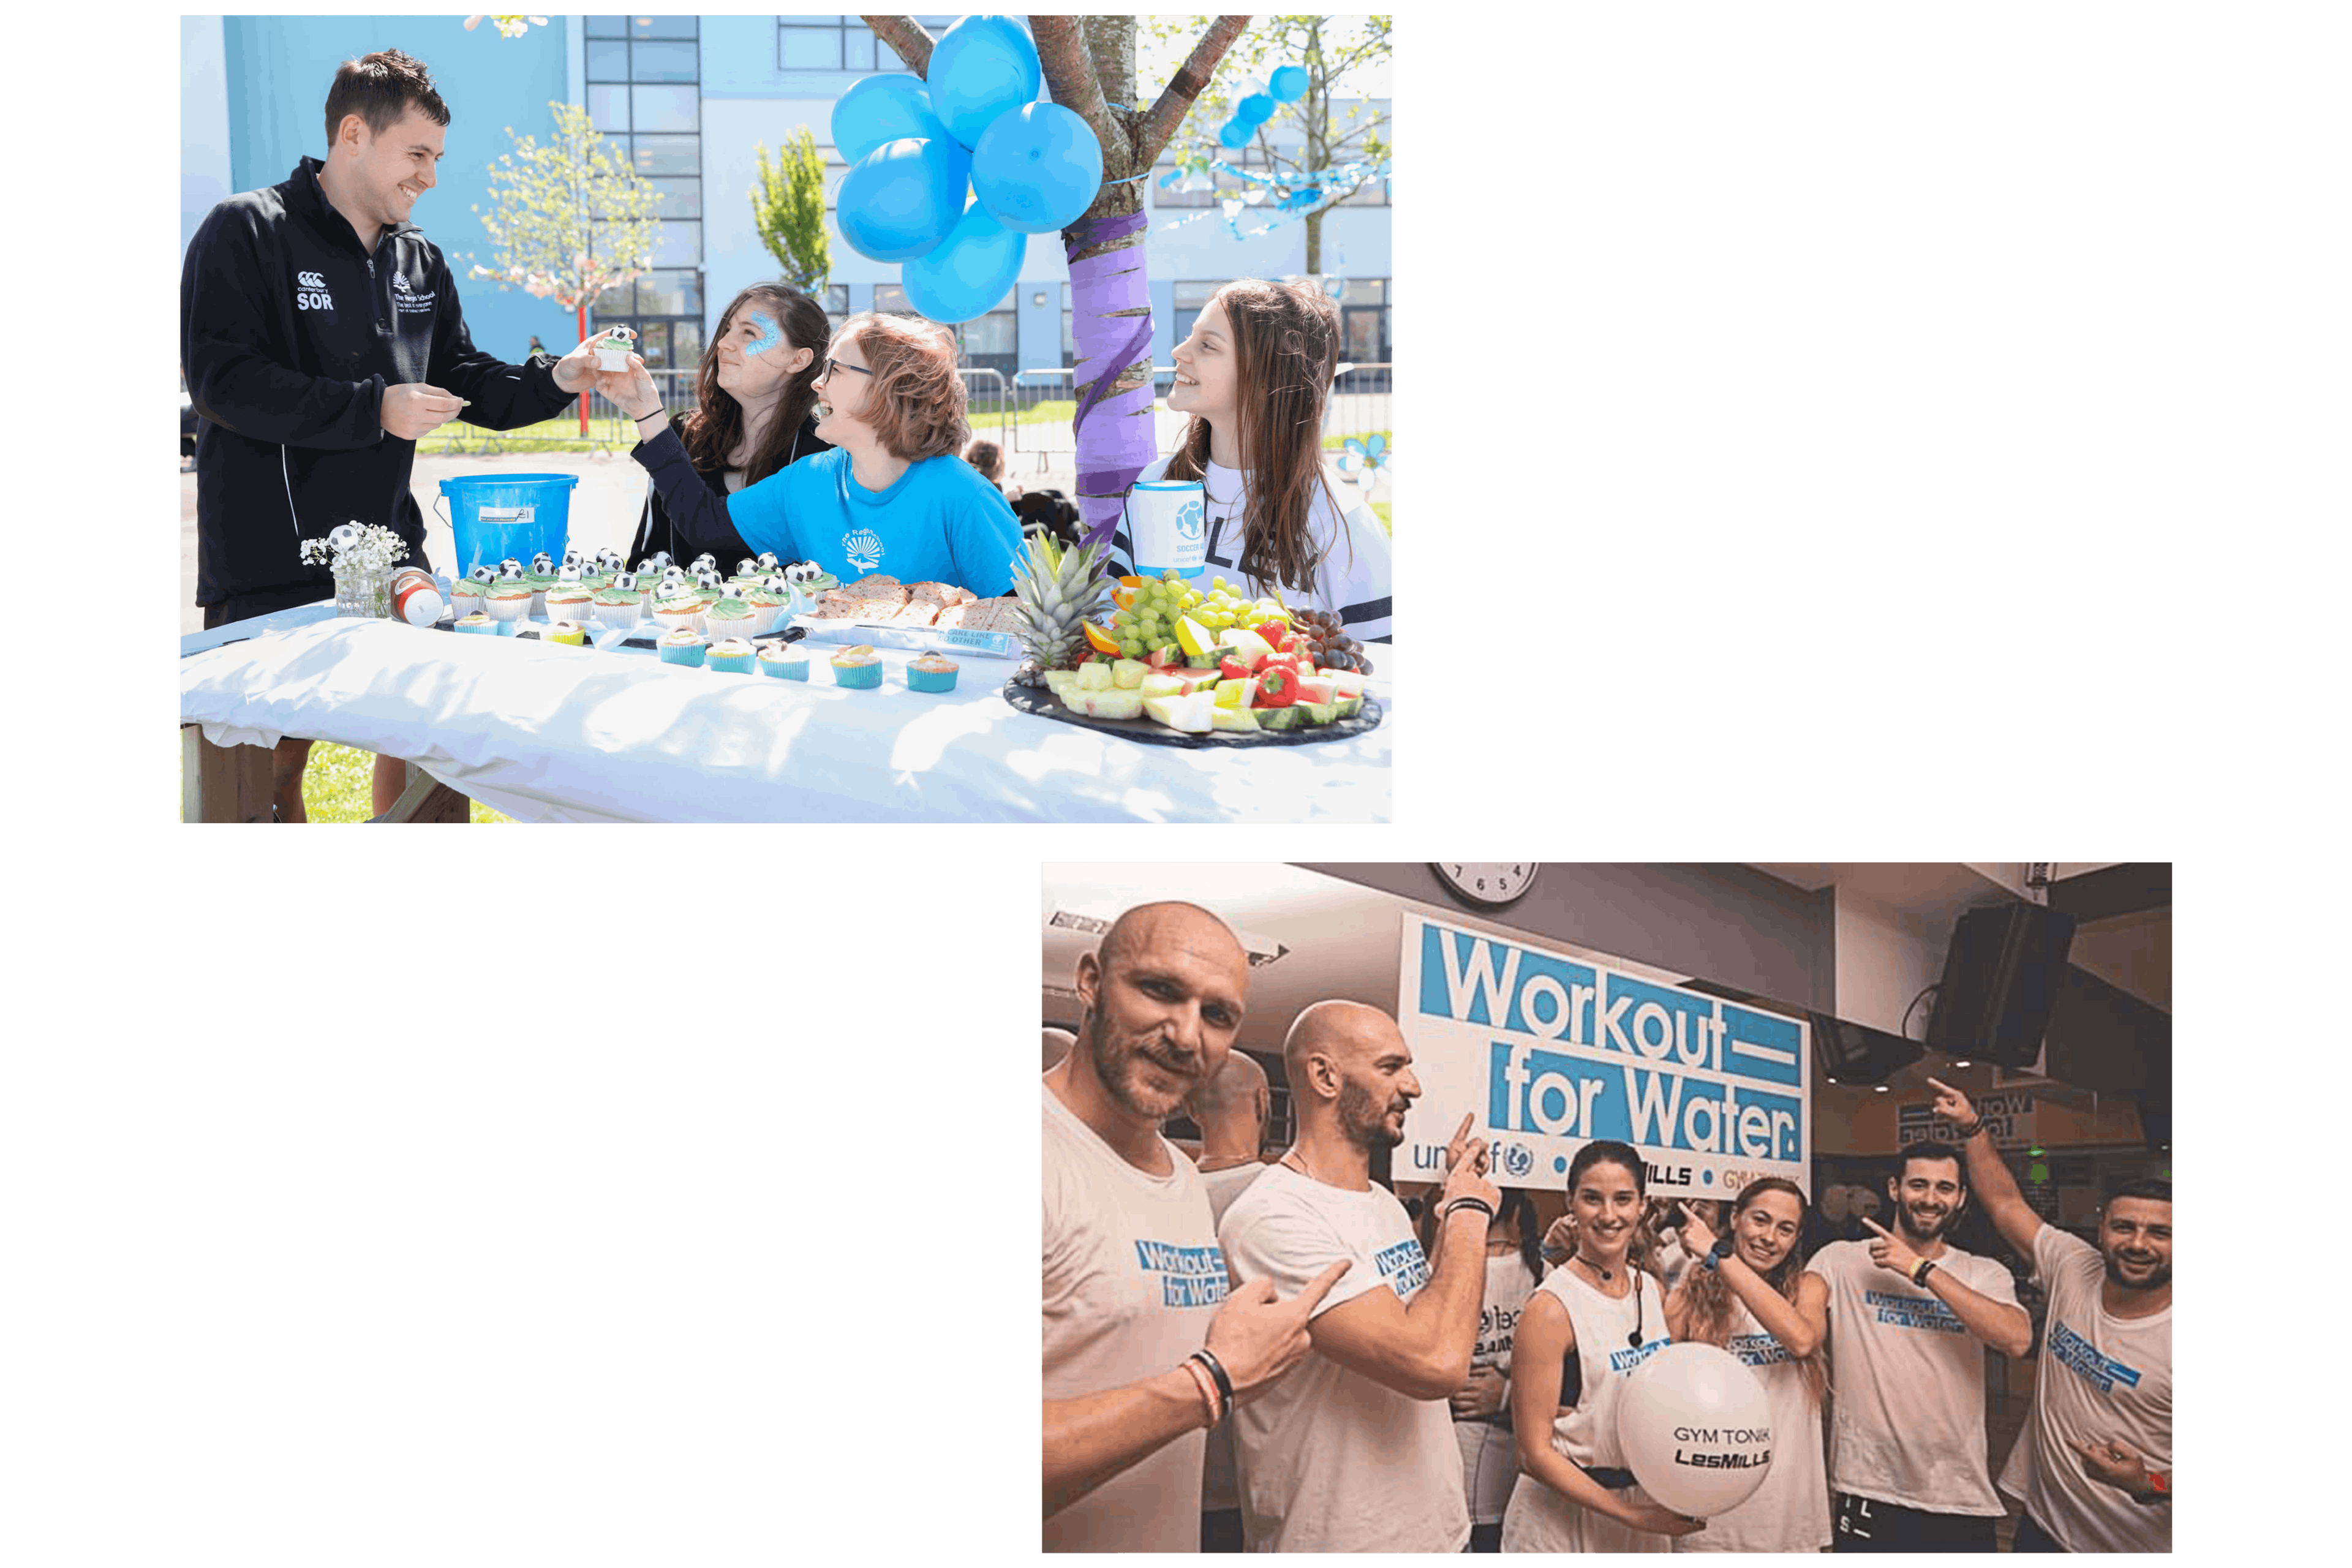 Photos from two UNICEF fundraisers